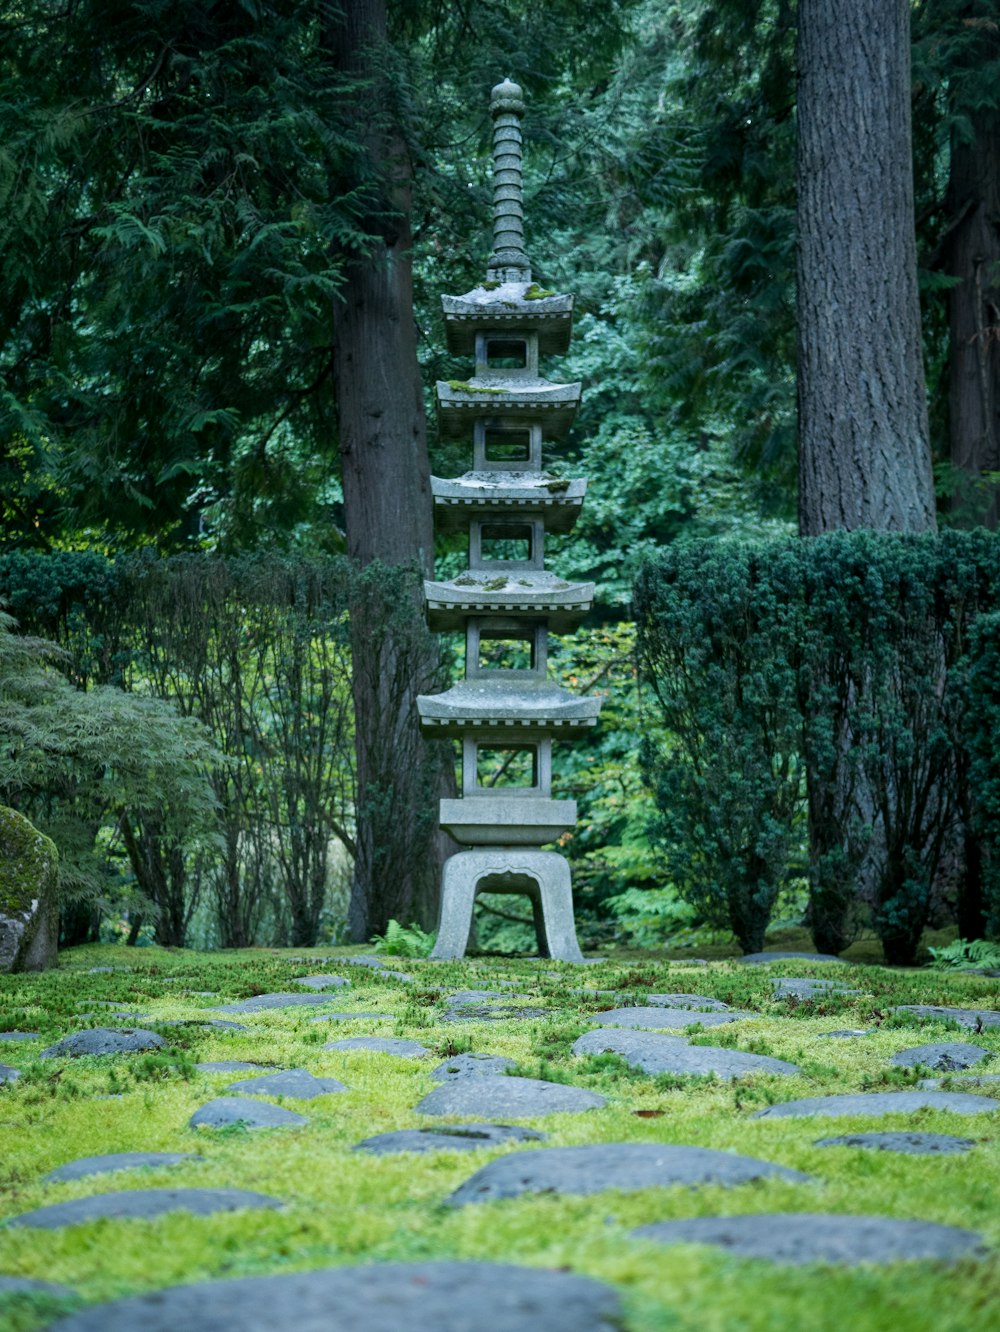 a stone pagoda in a garden surrounded by trees